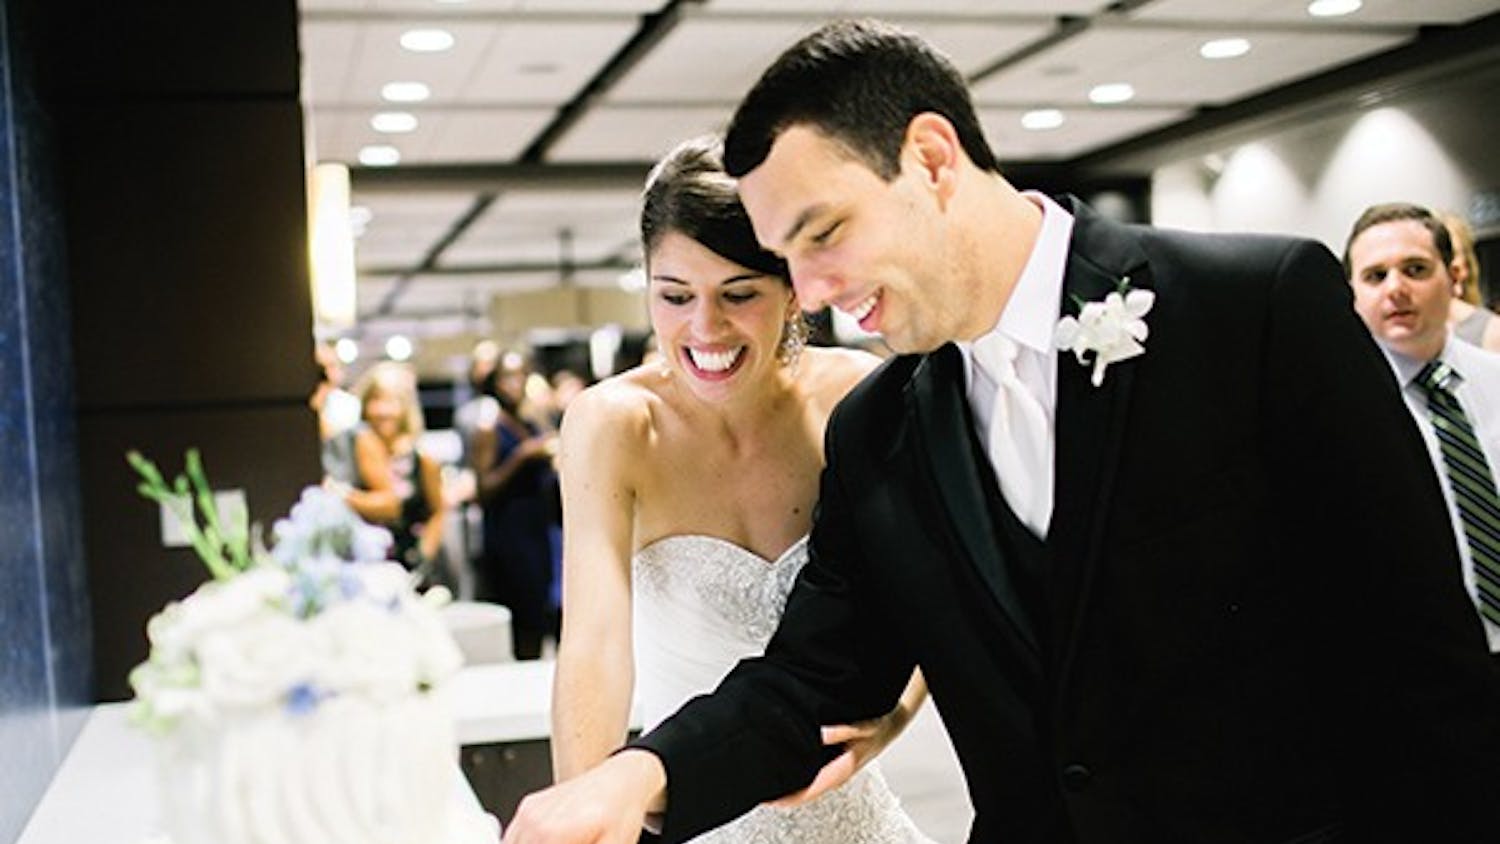 Shannon and Bryan Weynand got married in the Blue Zone in 2013.